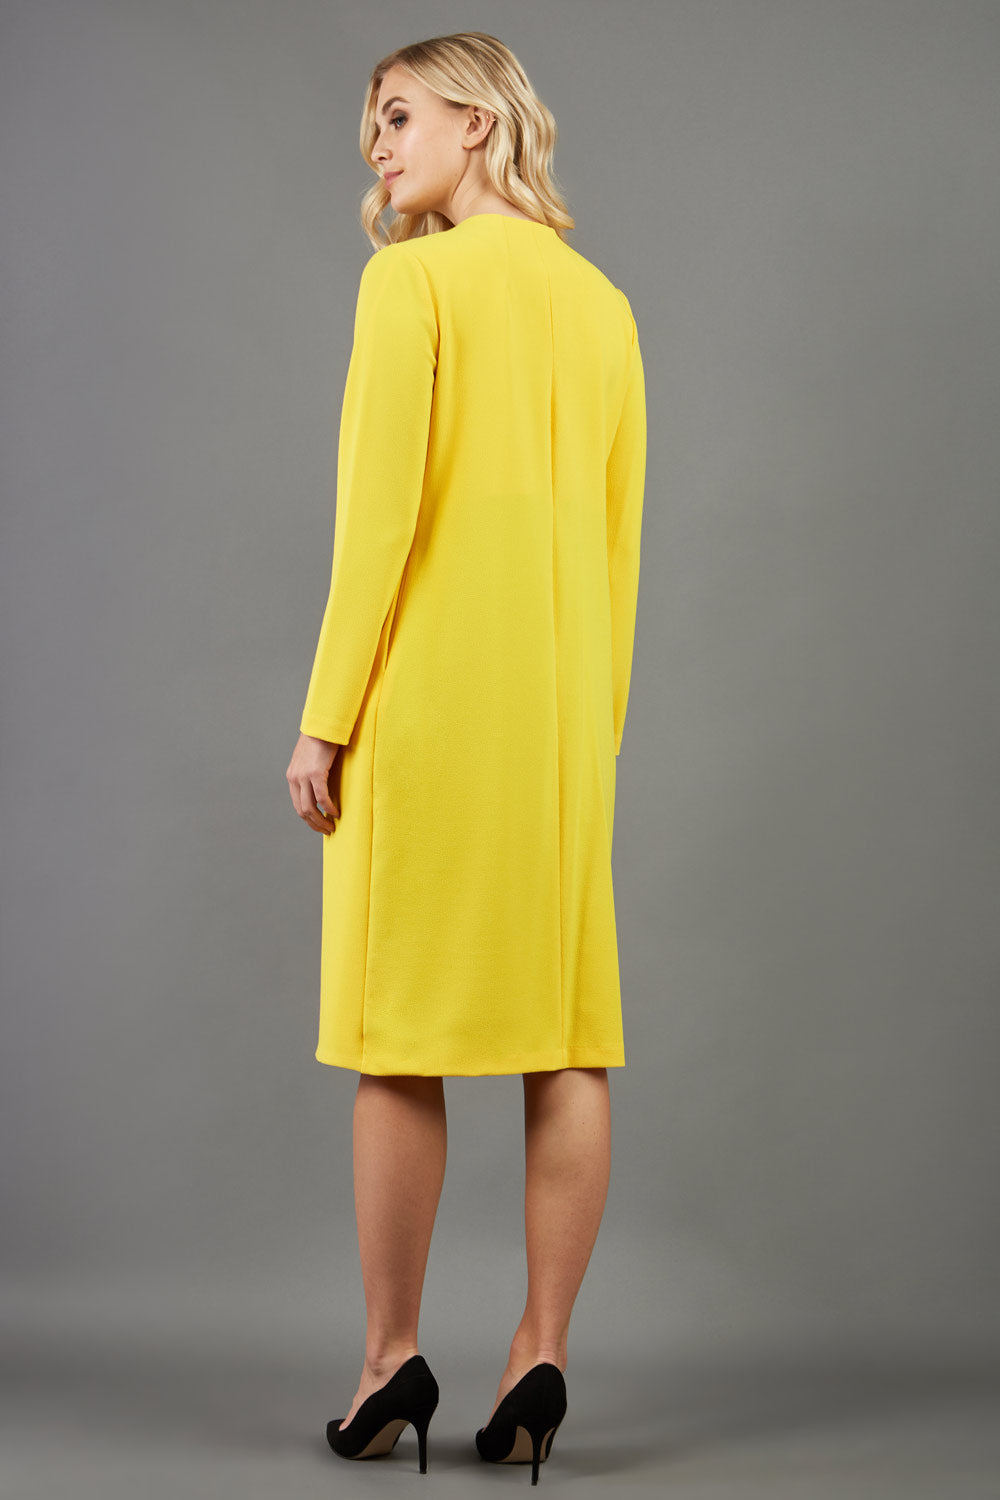 blonde model wearing the Diva Bliss Coat with round neckline in freesia yellow back image